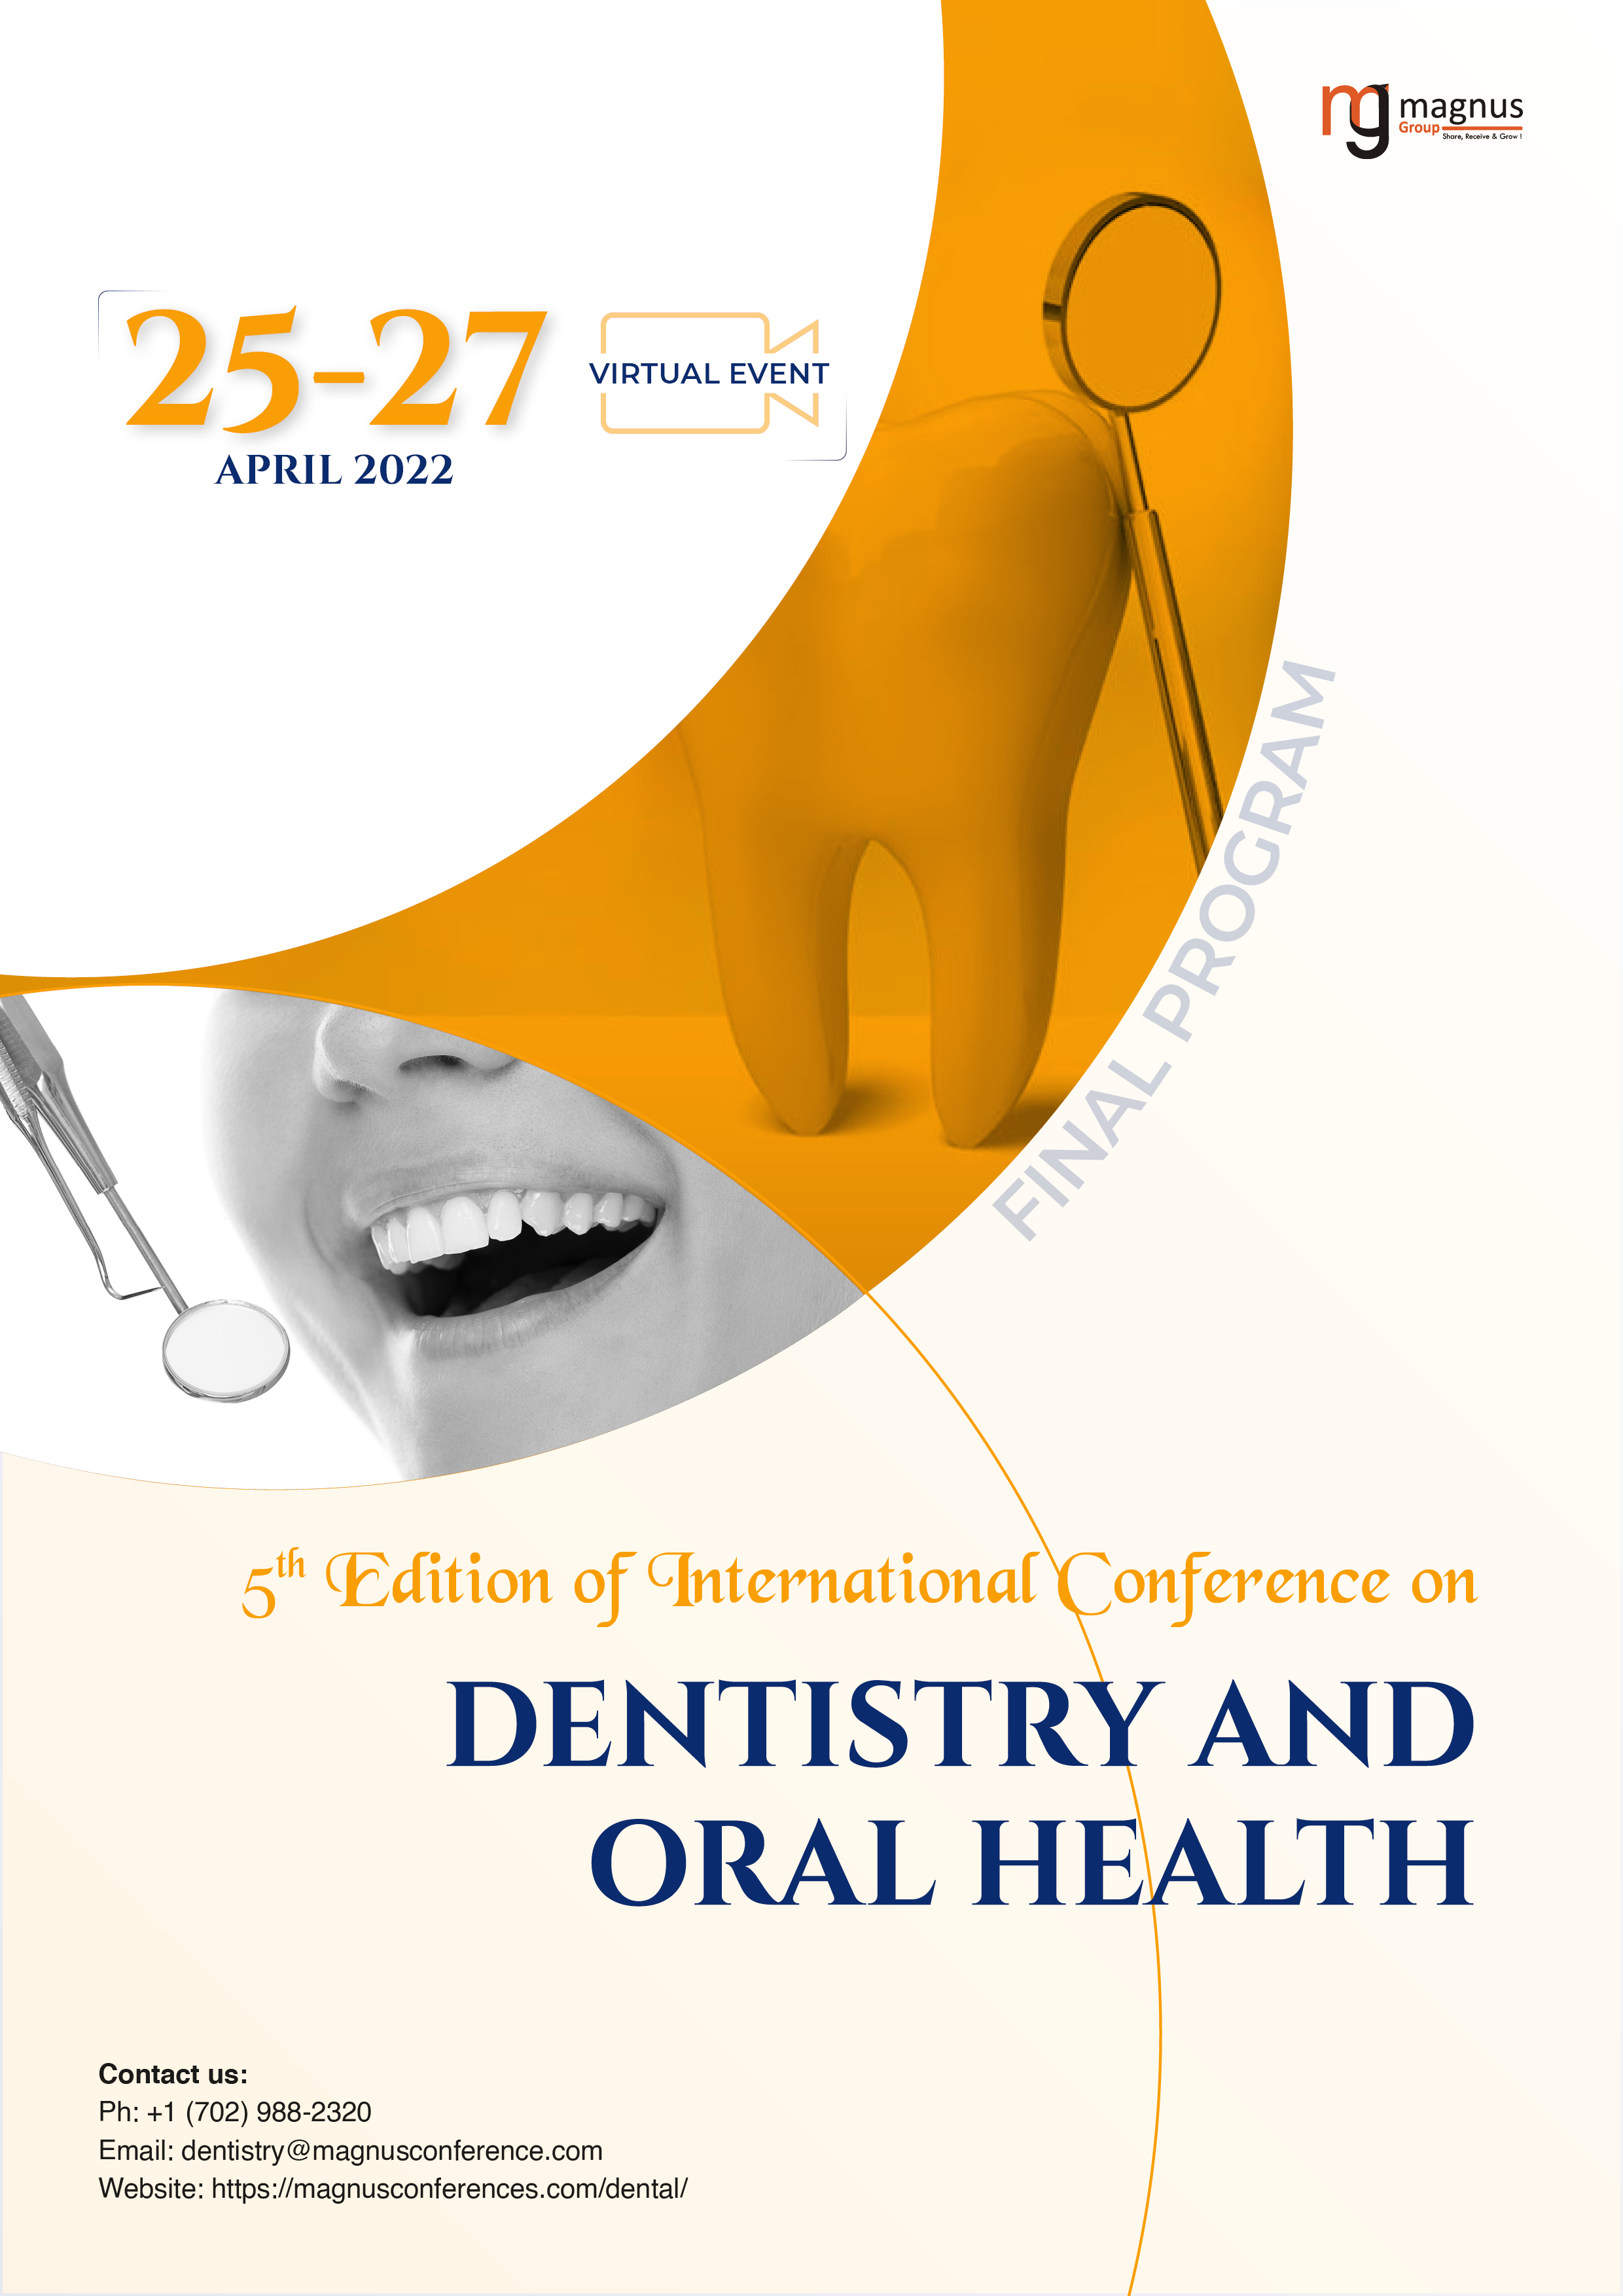 5th Edition of International Conference on Dentistry and Oral Health | Online Program